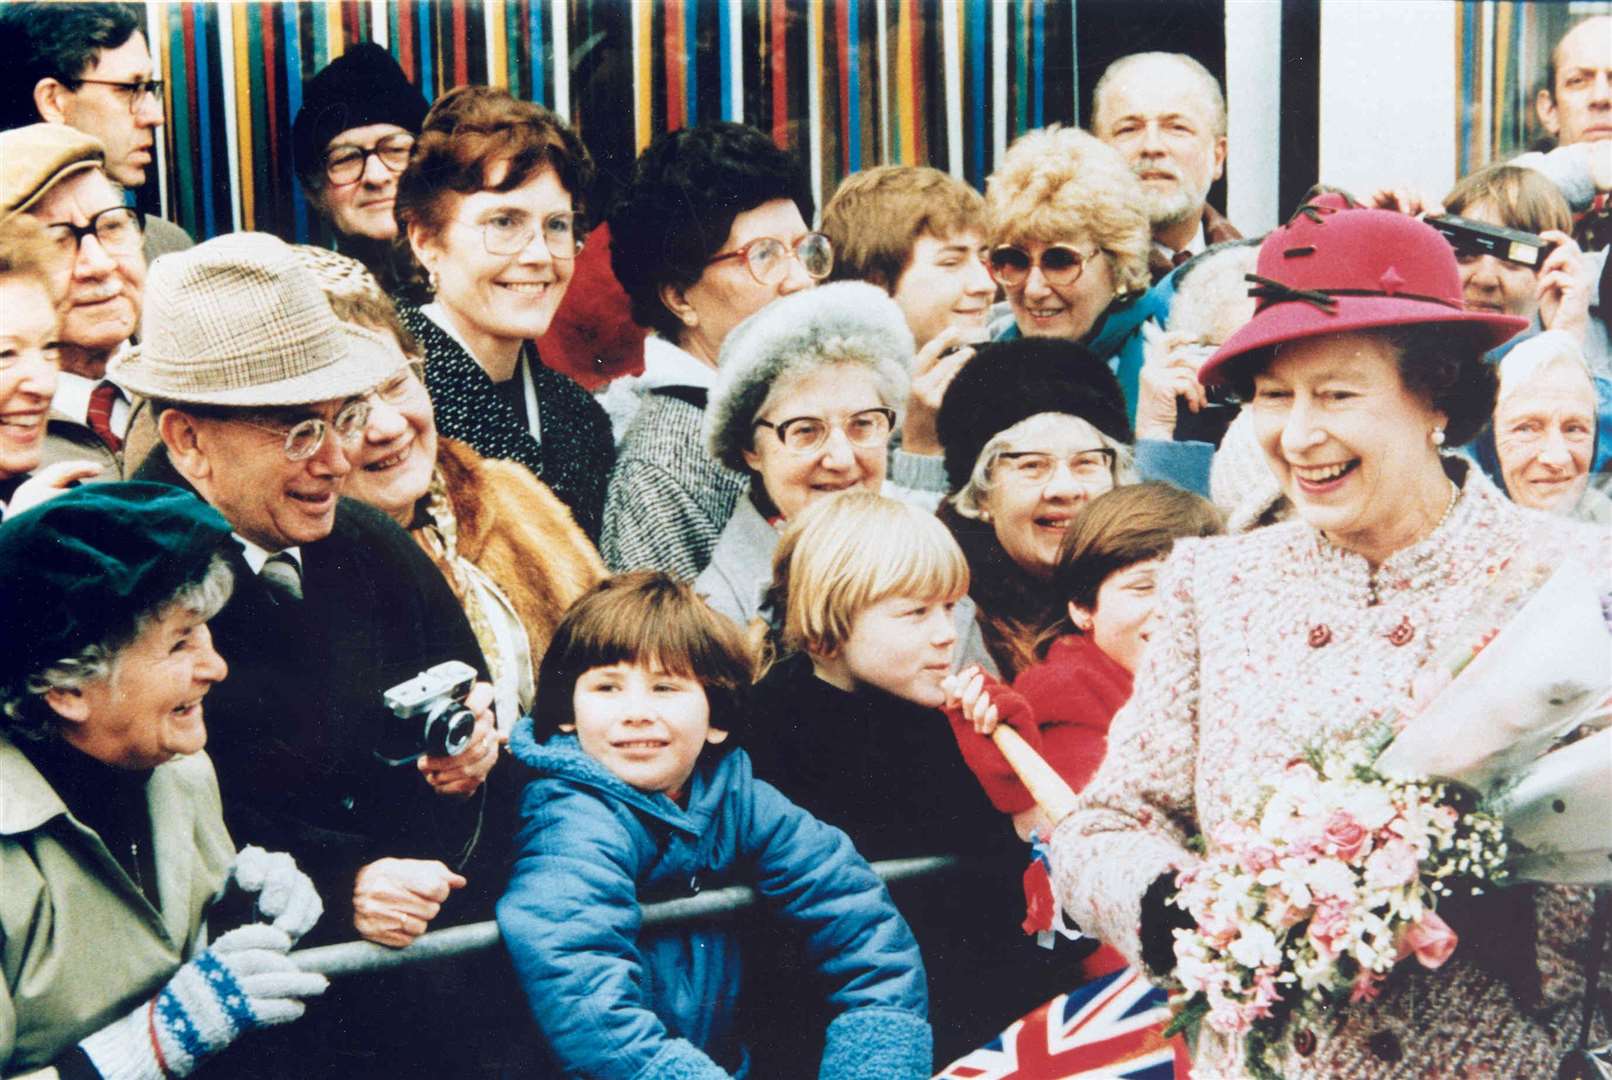 The Queen smiled happily at the crowds in Canterbury when she was in the city to open Cathedral House, the administrative hub of the cathedral in March 1987